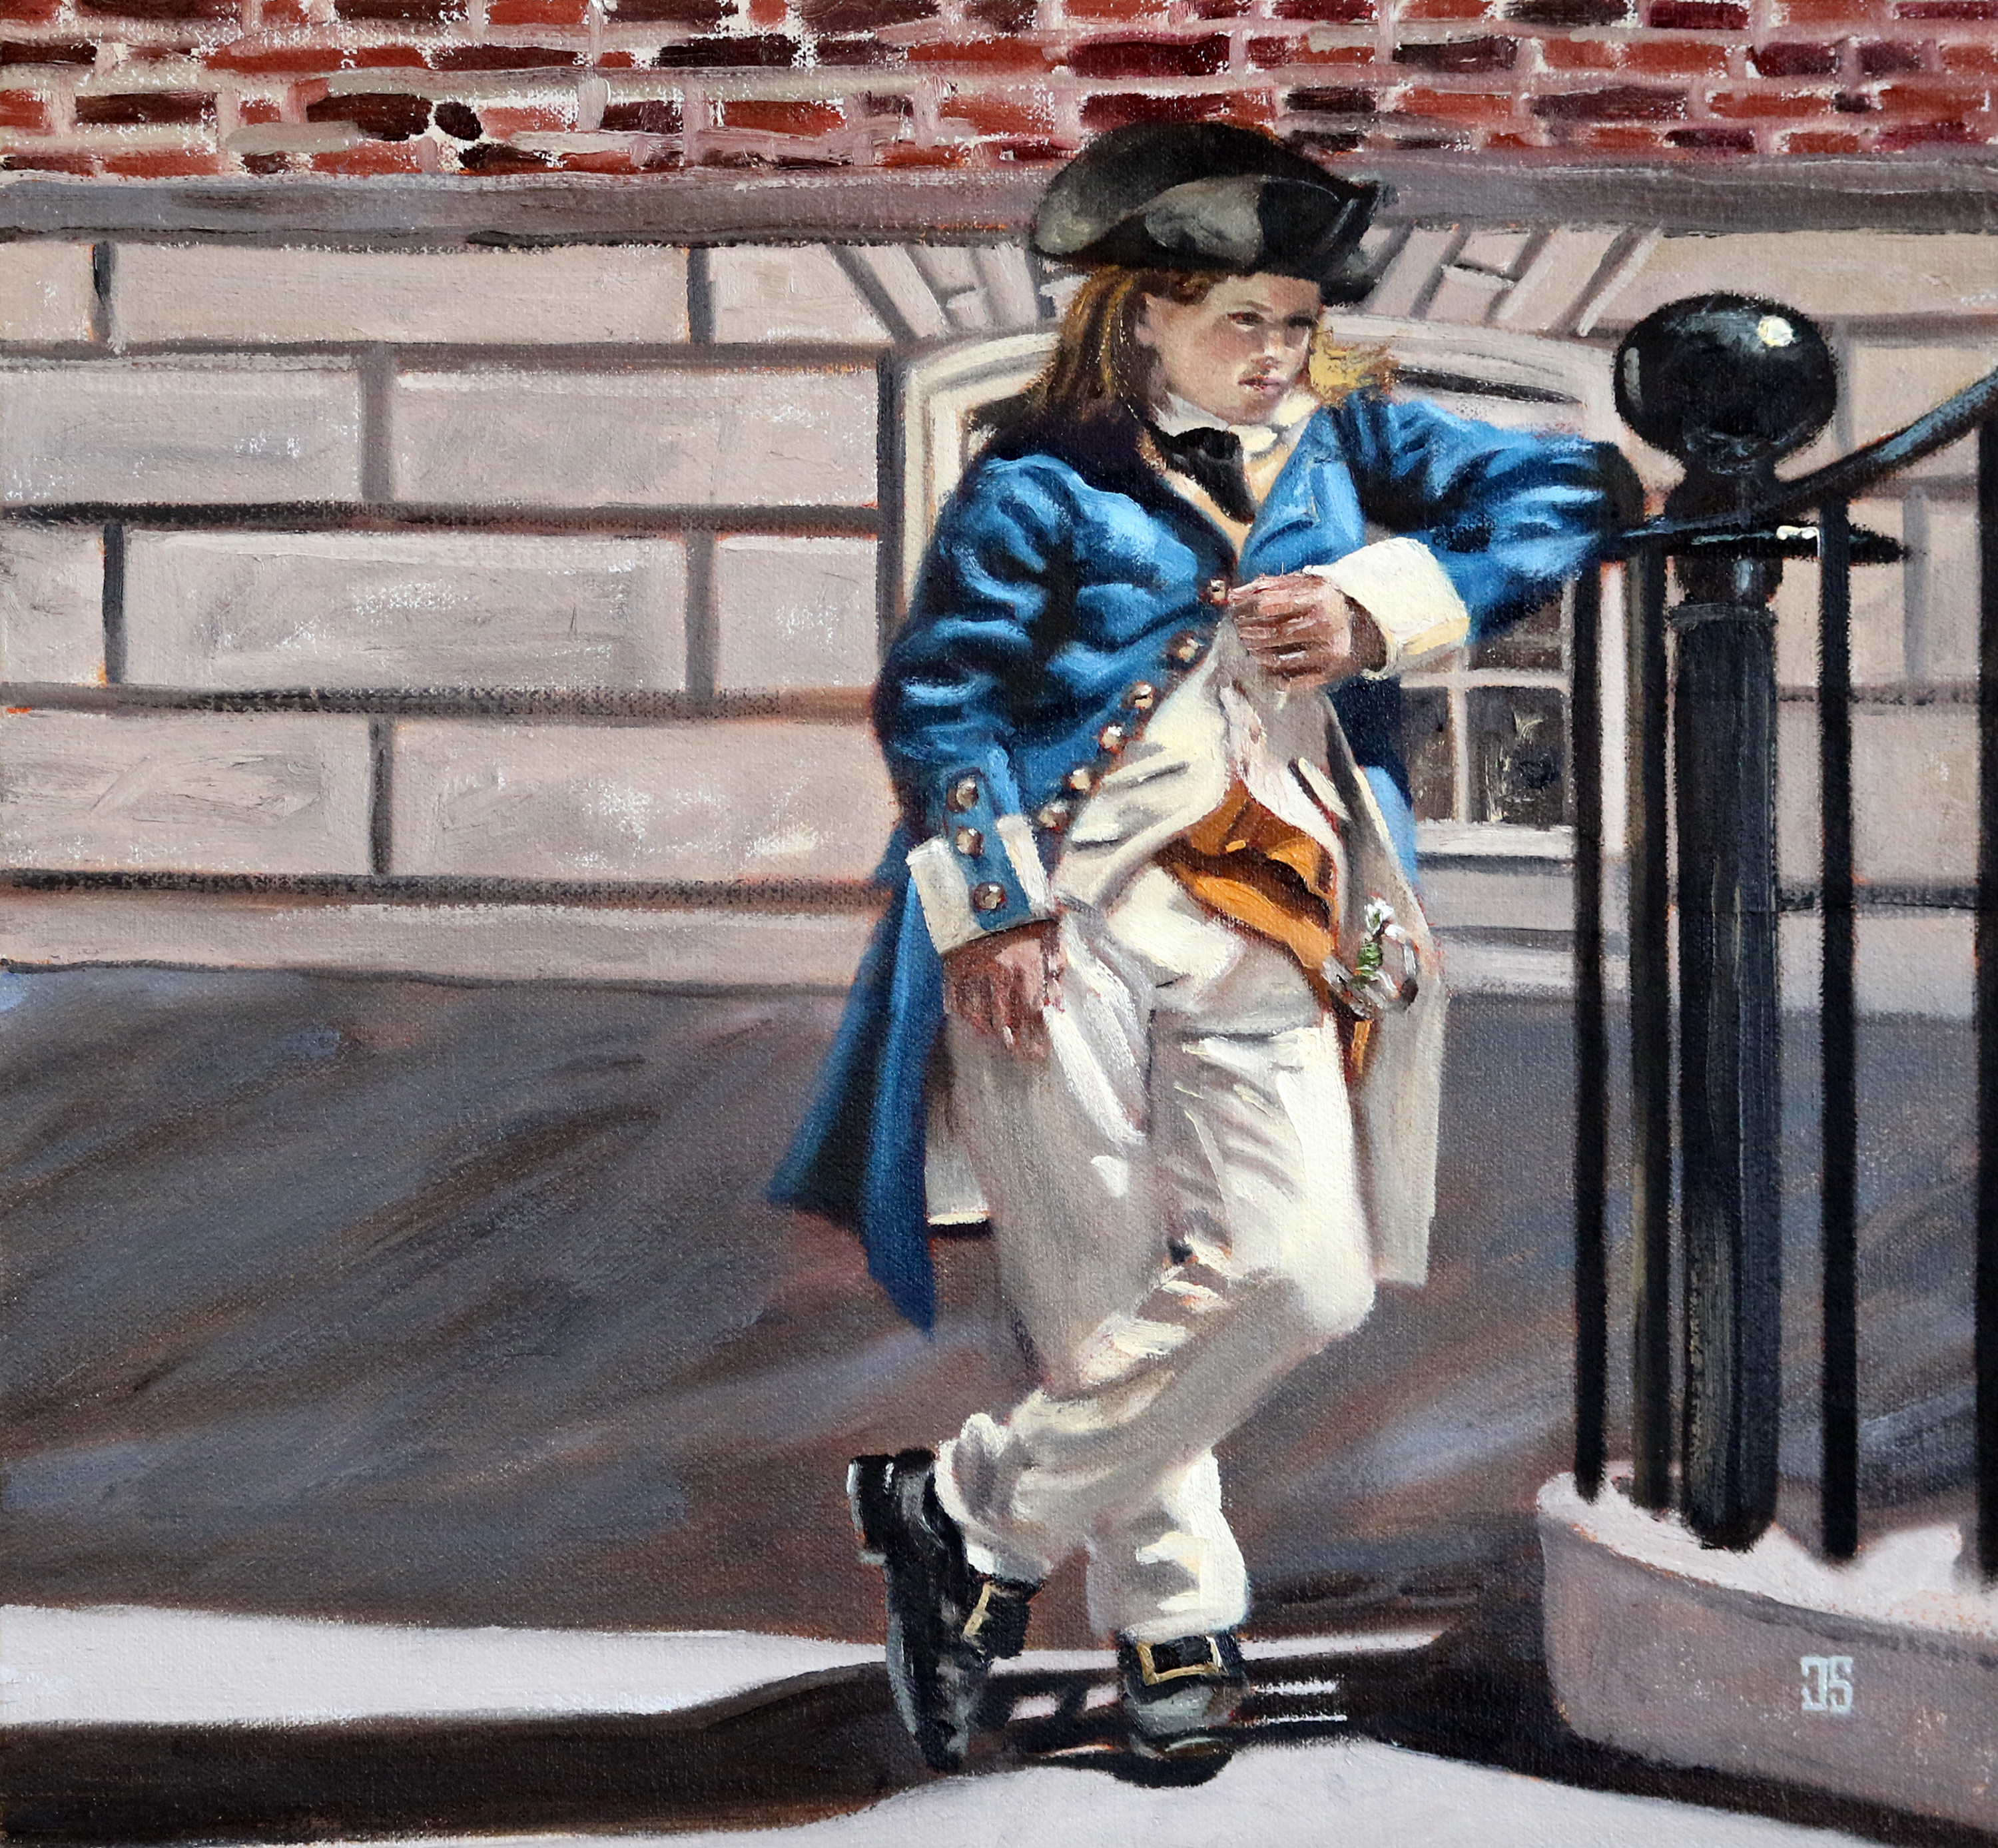 Oil painting "The Boy Soldier" by Jeffrey Dale Starr